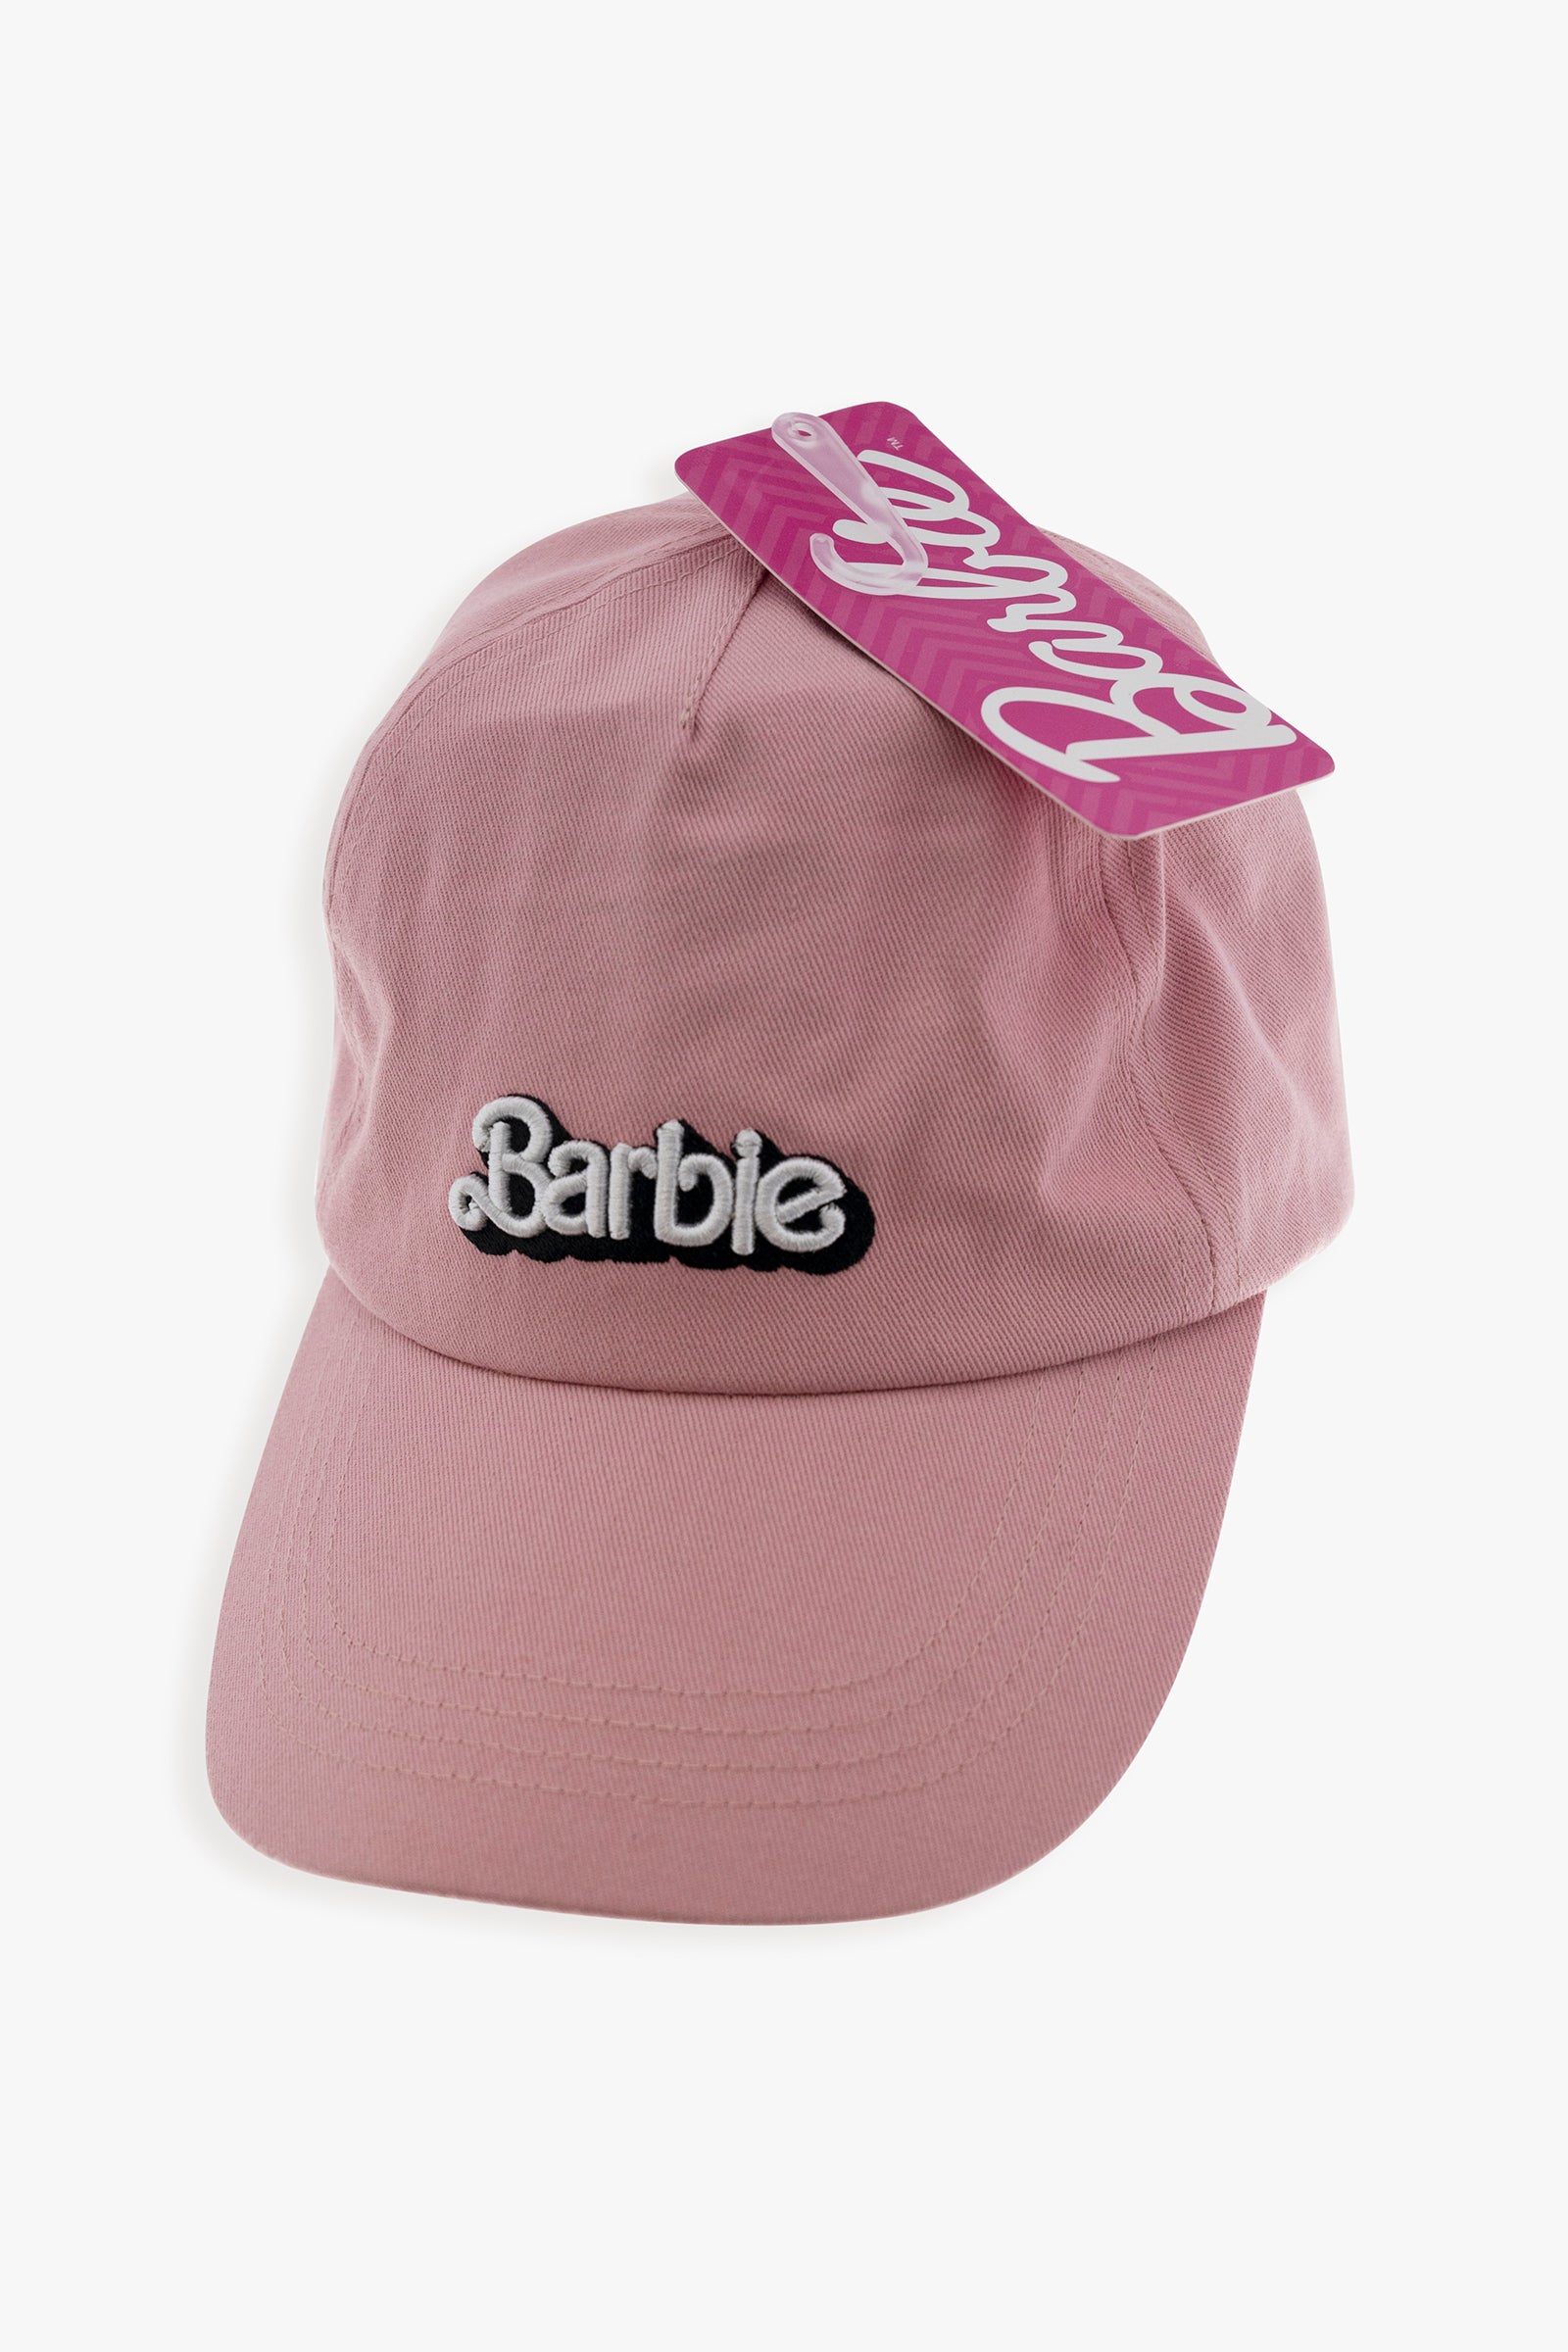 Gertex Barbie Ladies Baseball Cap Hat with 3D Embroidery Logo